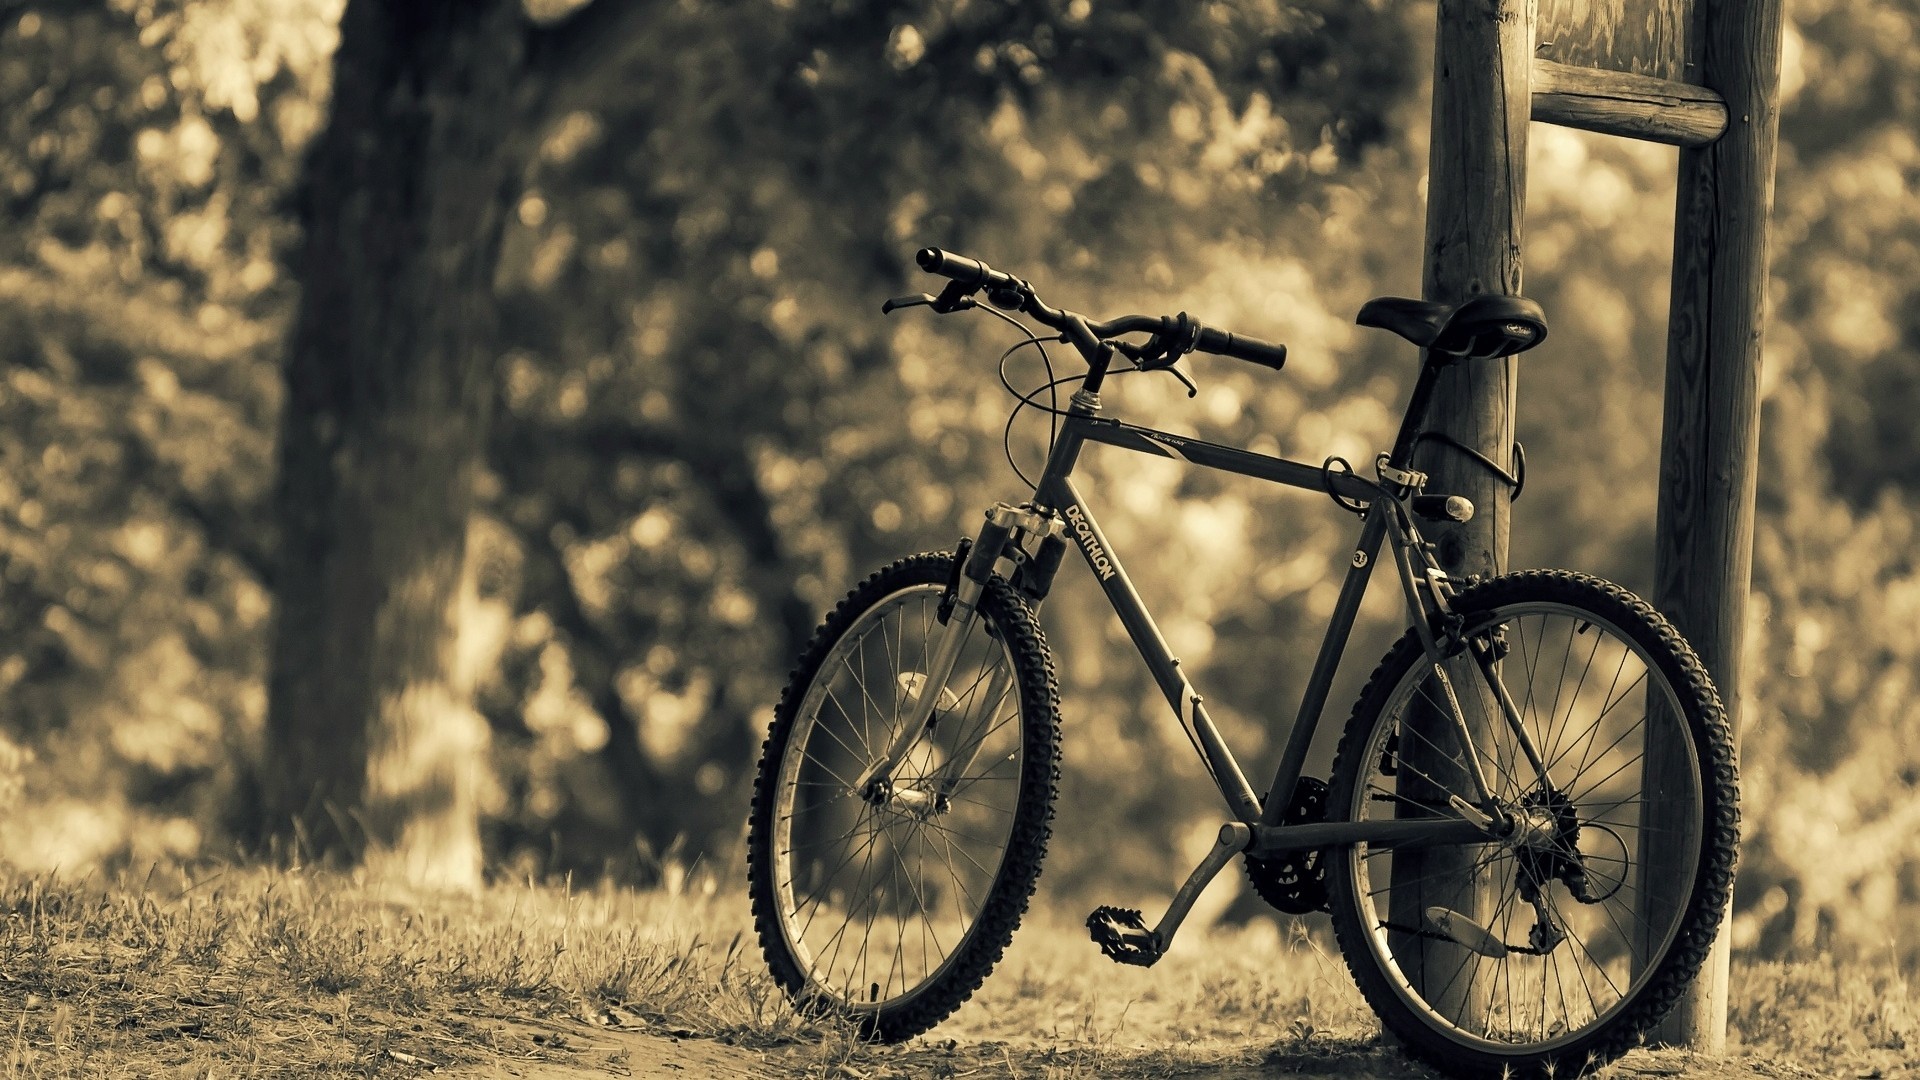 General 1920x1080 bicycle sepia vehicle outdoors